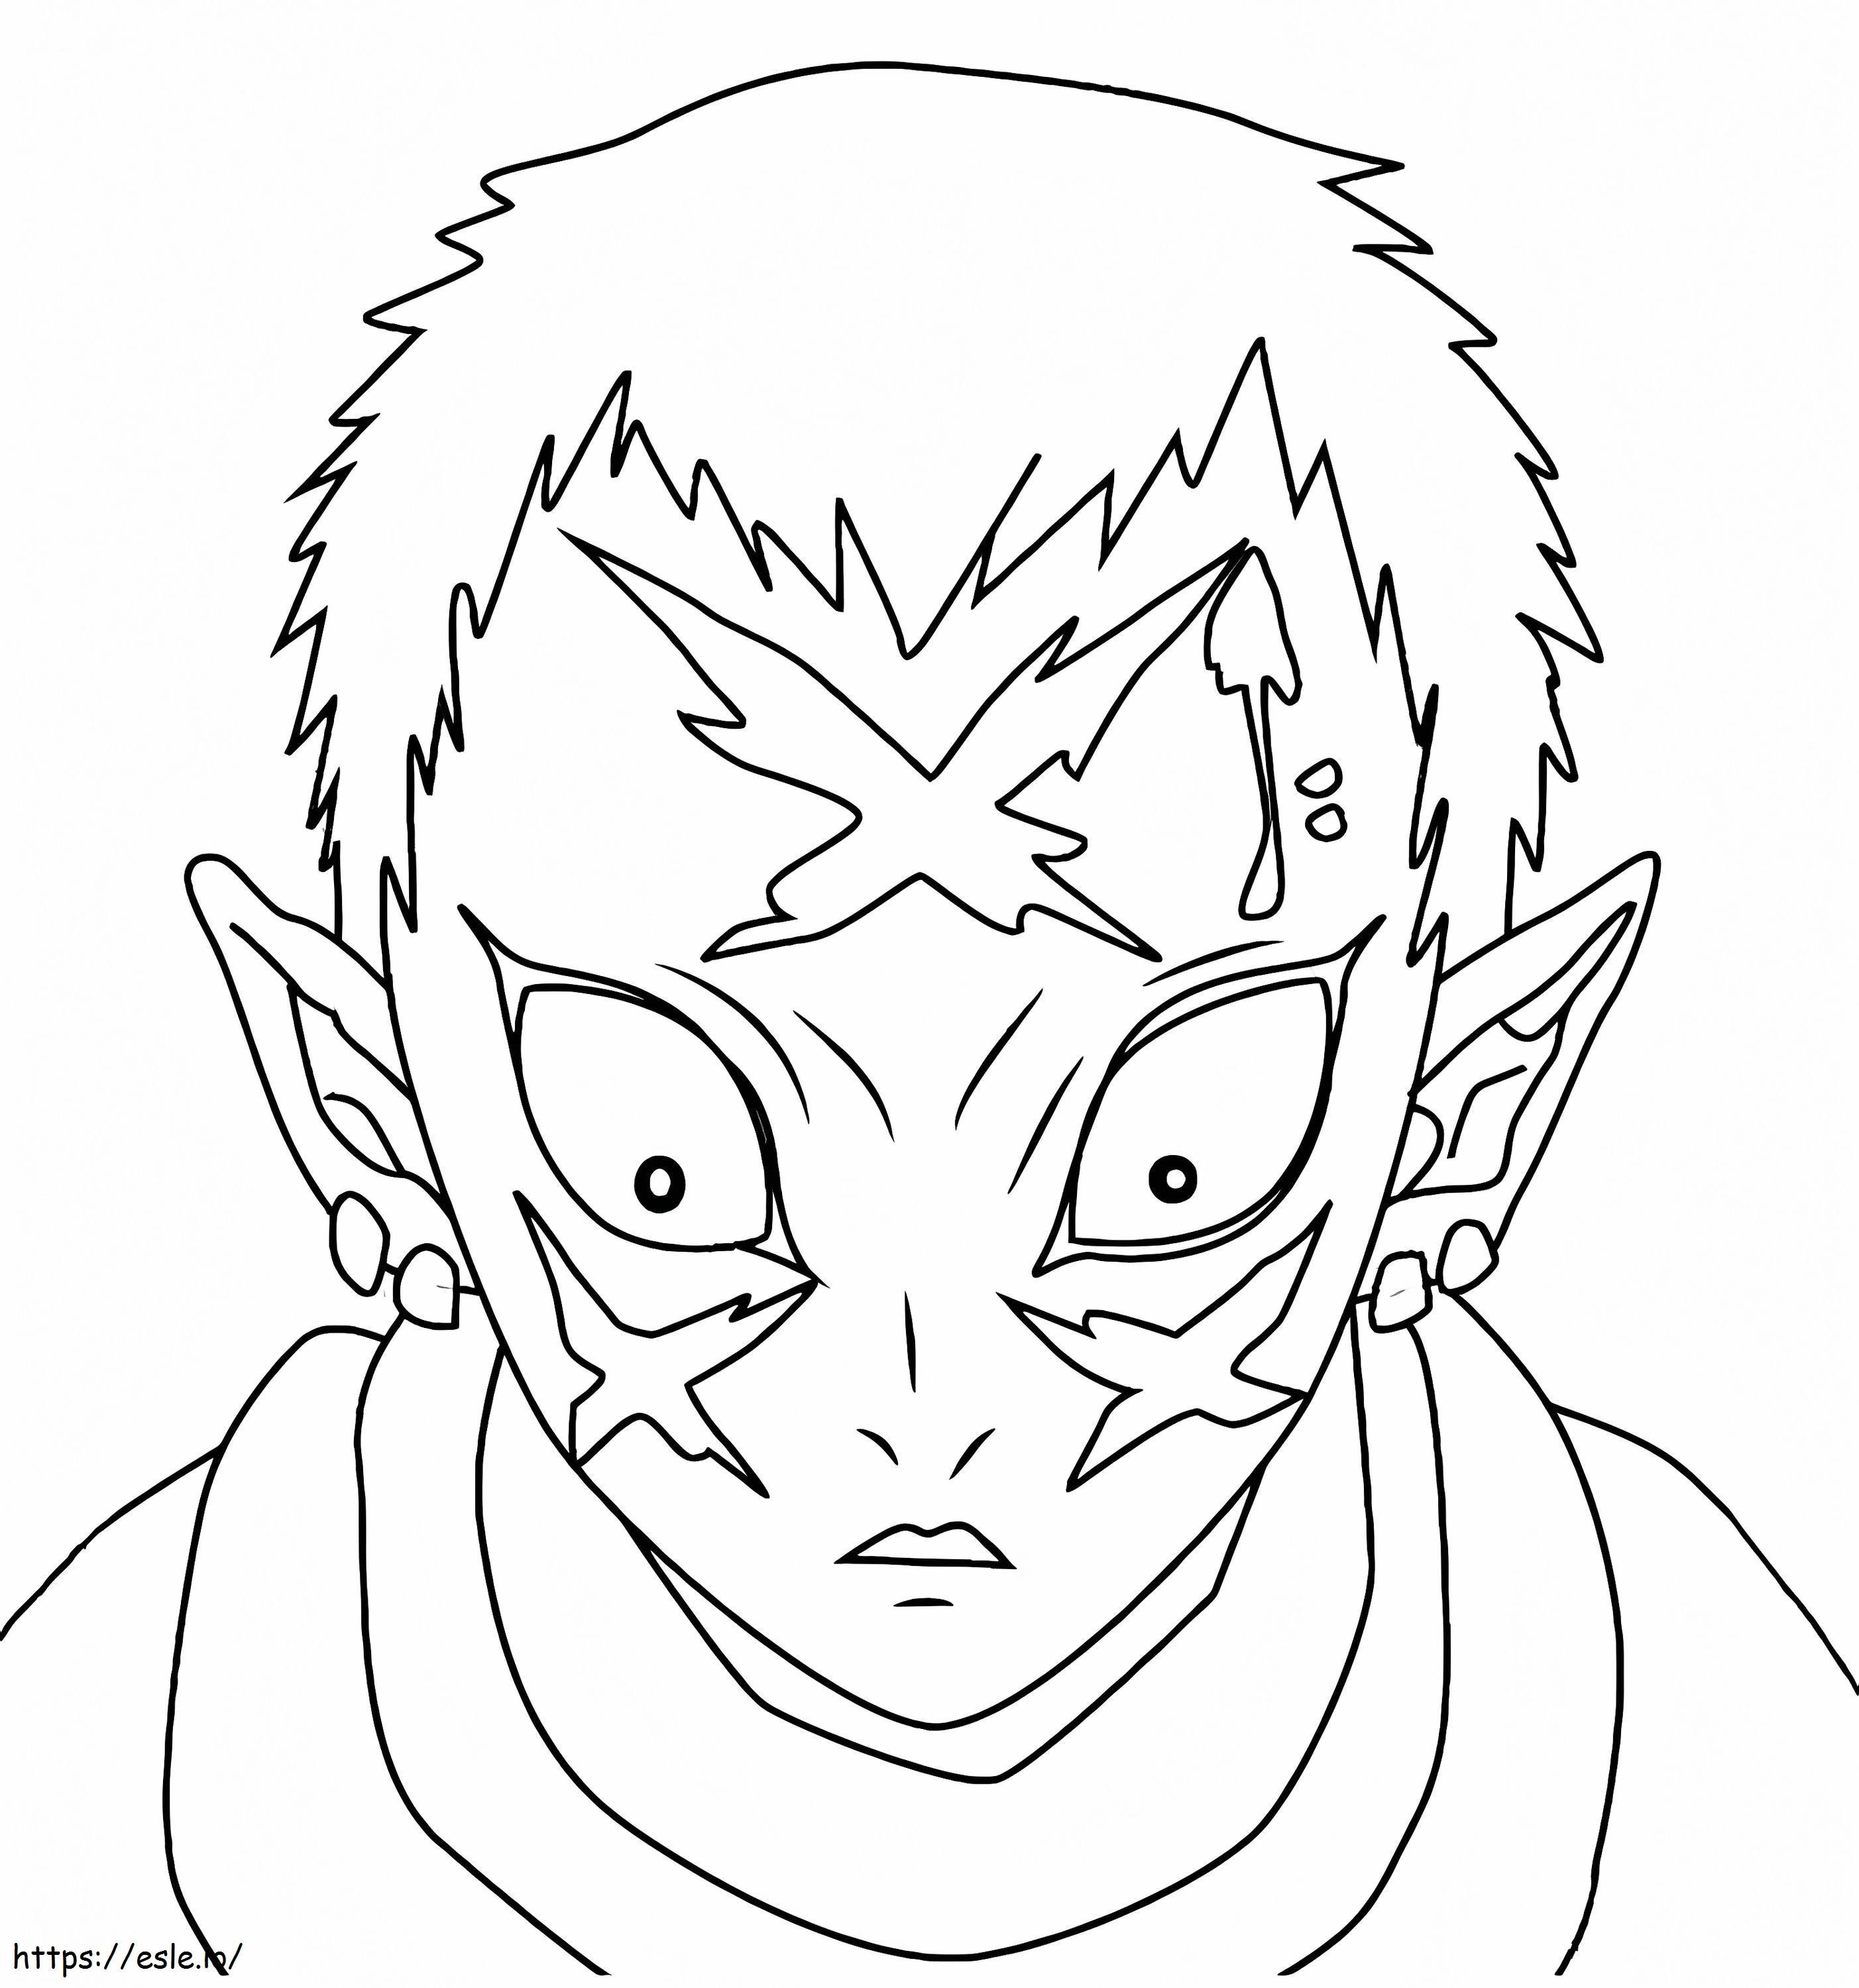 Watch From Demon Slayer coloring page